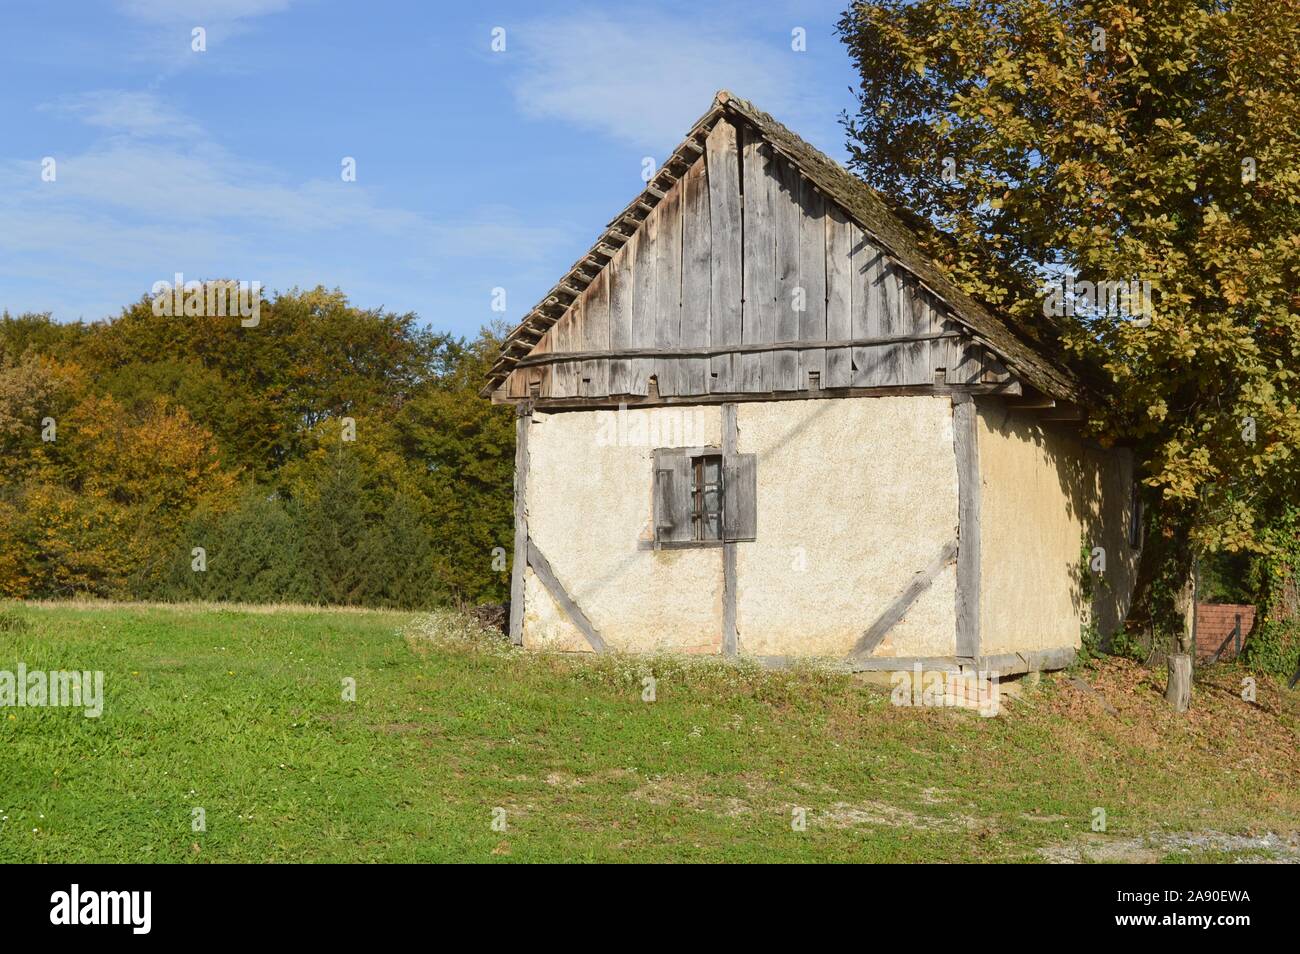 Old traditional house in croatian countryside, autumn colors Stock Photo